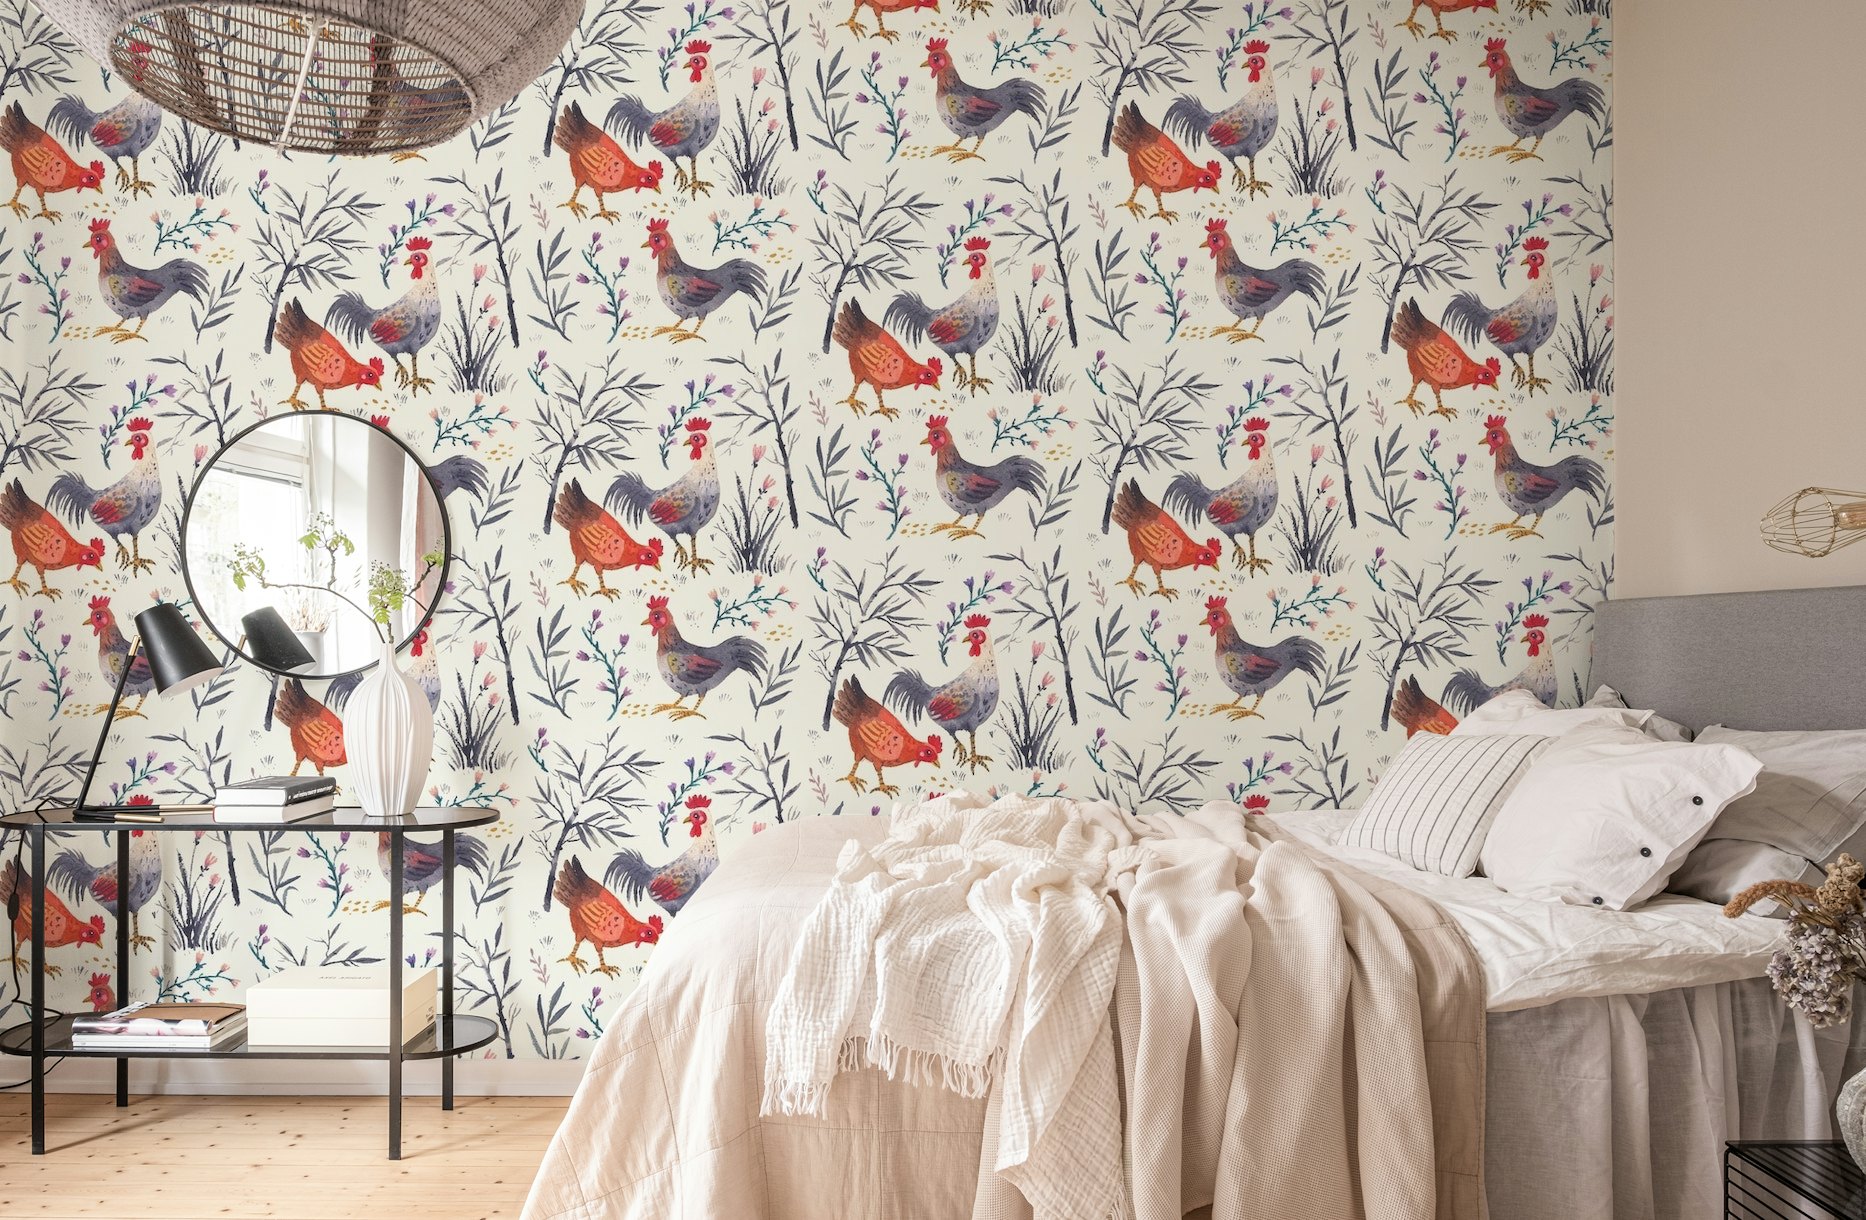 Chickens with Bamboo wallpaper